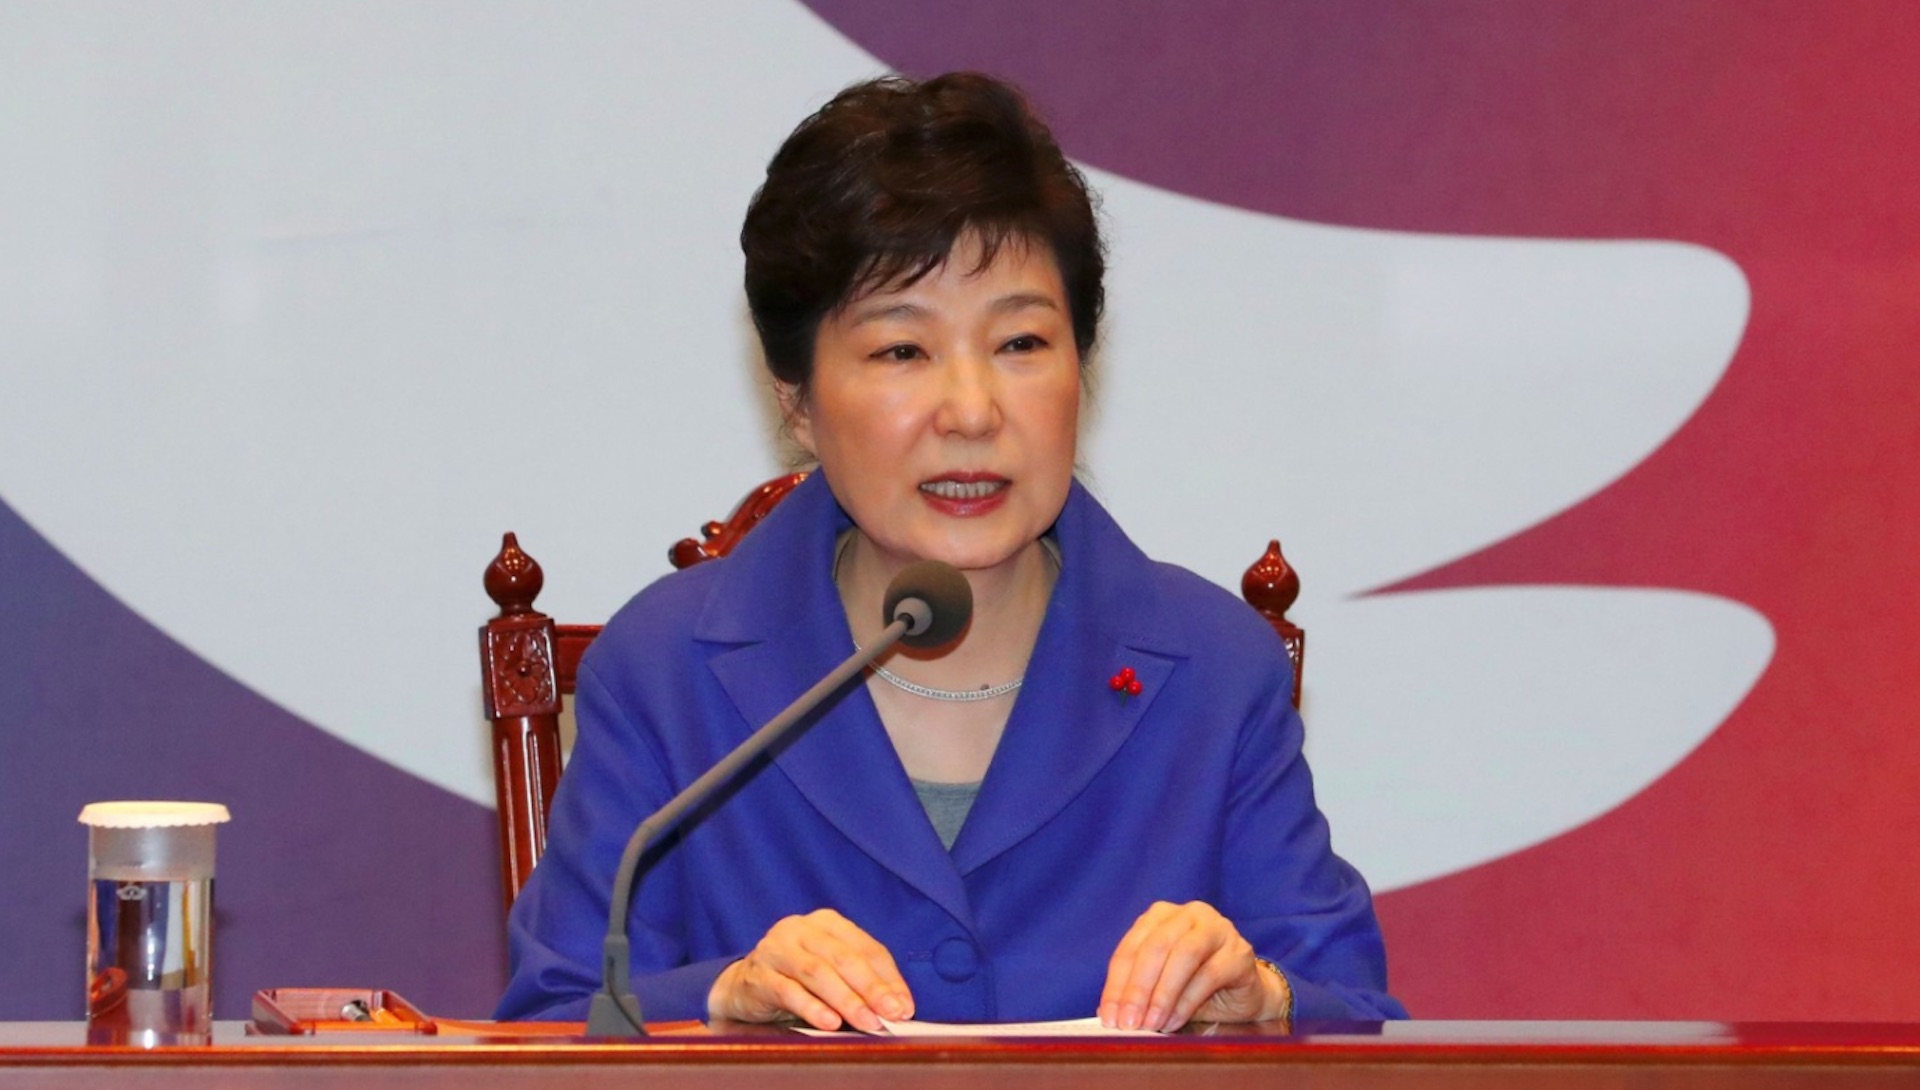 South Korean President Removed From Office Over Corruption Scandal The Washington Post